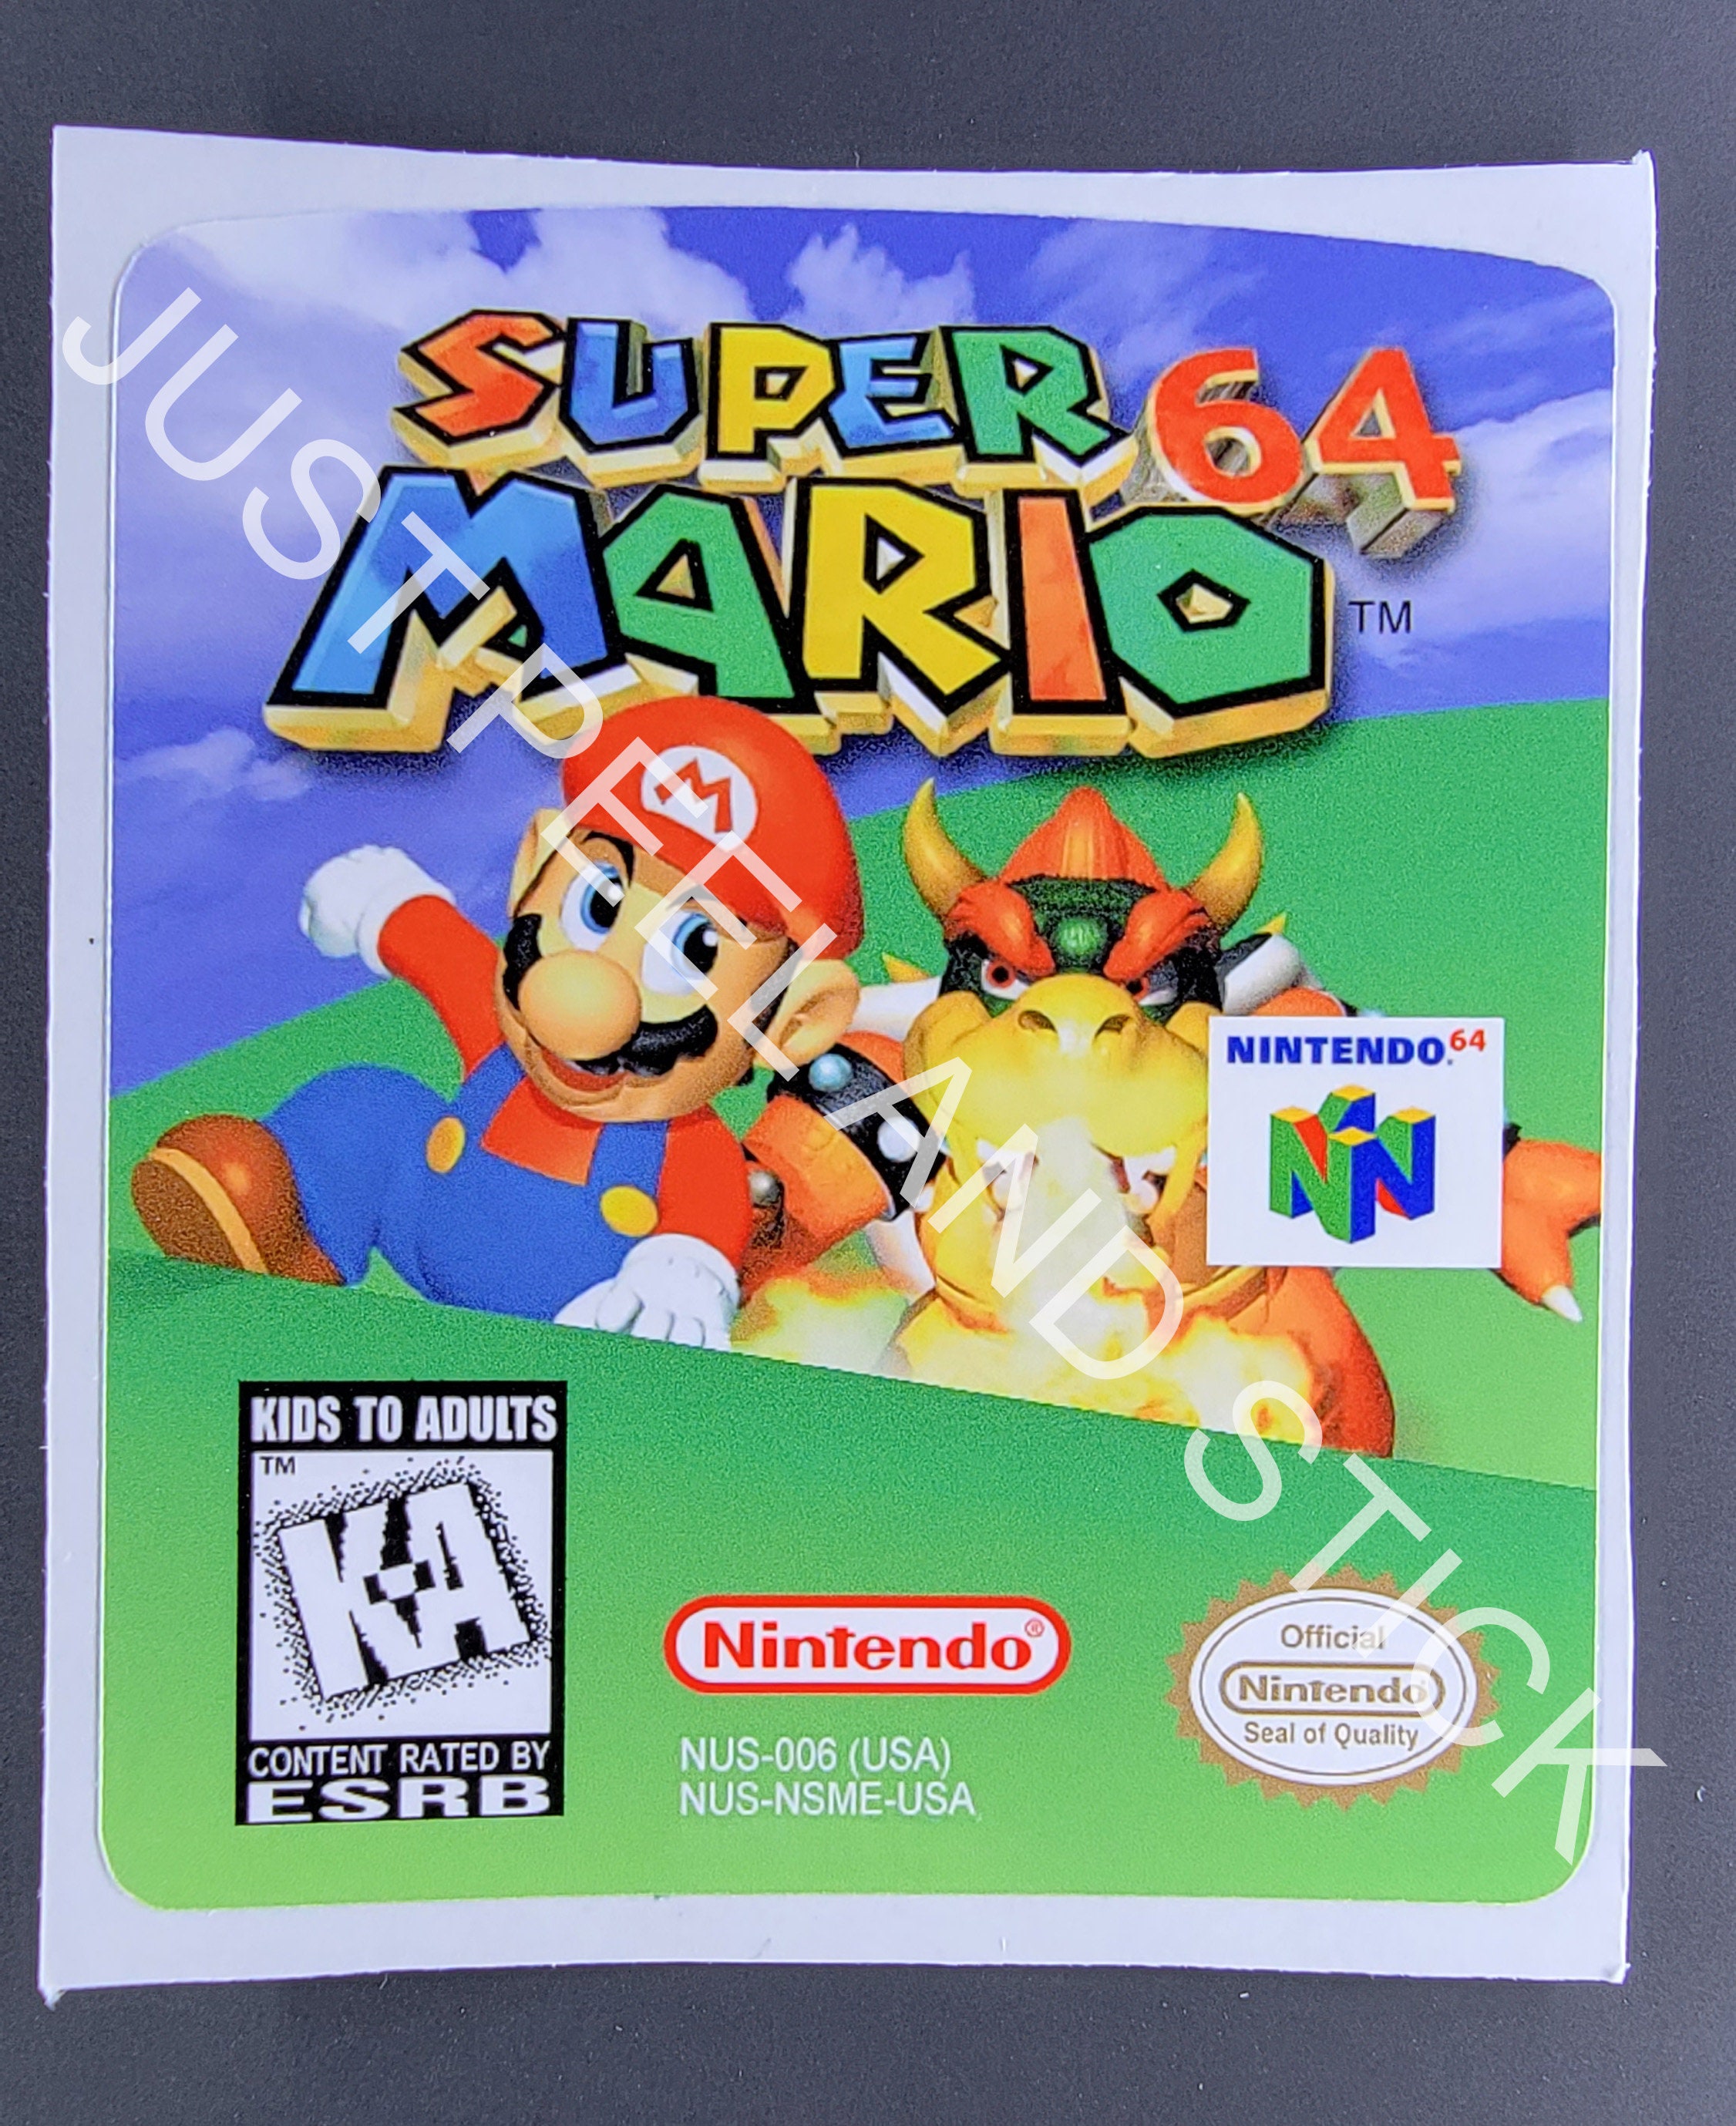 N64 Super Mario 64 Replacement Label Decal Sticker - Etsy